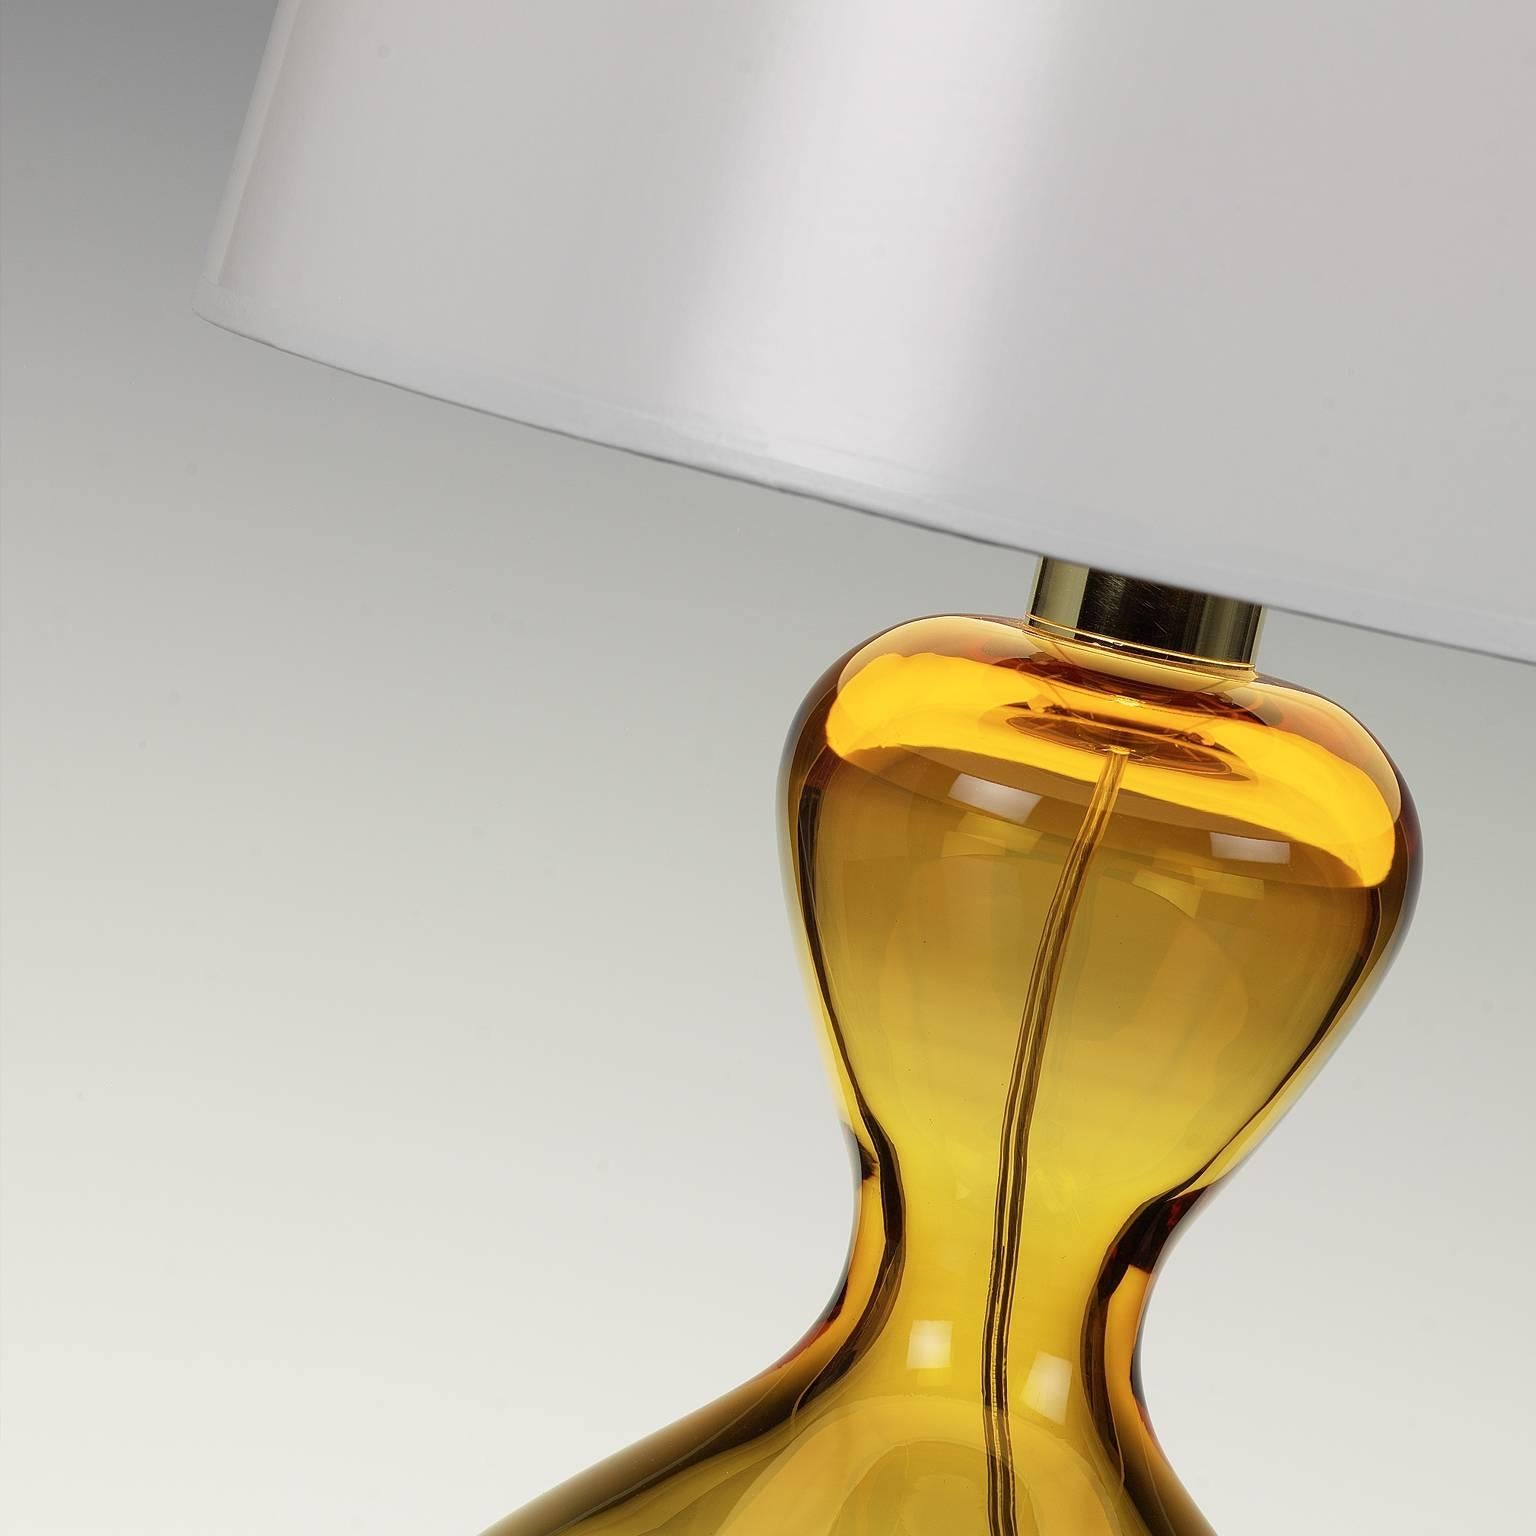 Clessidra Murano glass table lamp by Seguso Vetri d'Arte. Handmade, blown Murano glass in a sinuous and delicate silhouette, reminiscent of the shape of an hour glass, or 